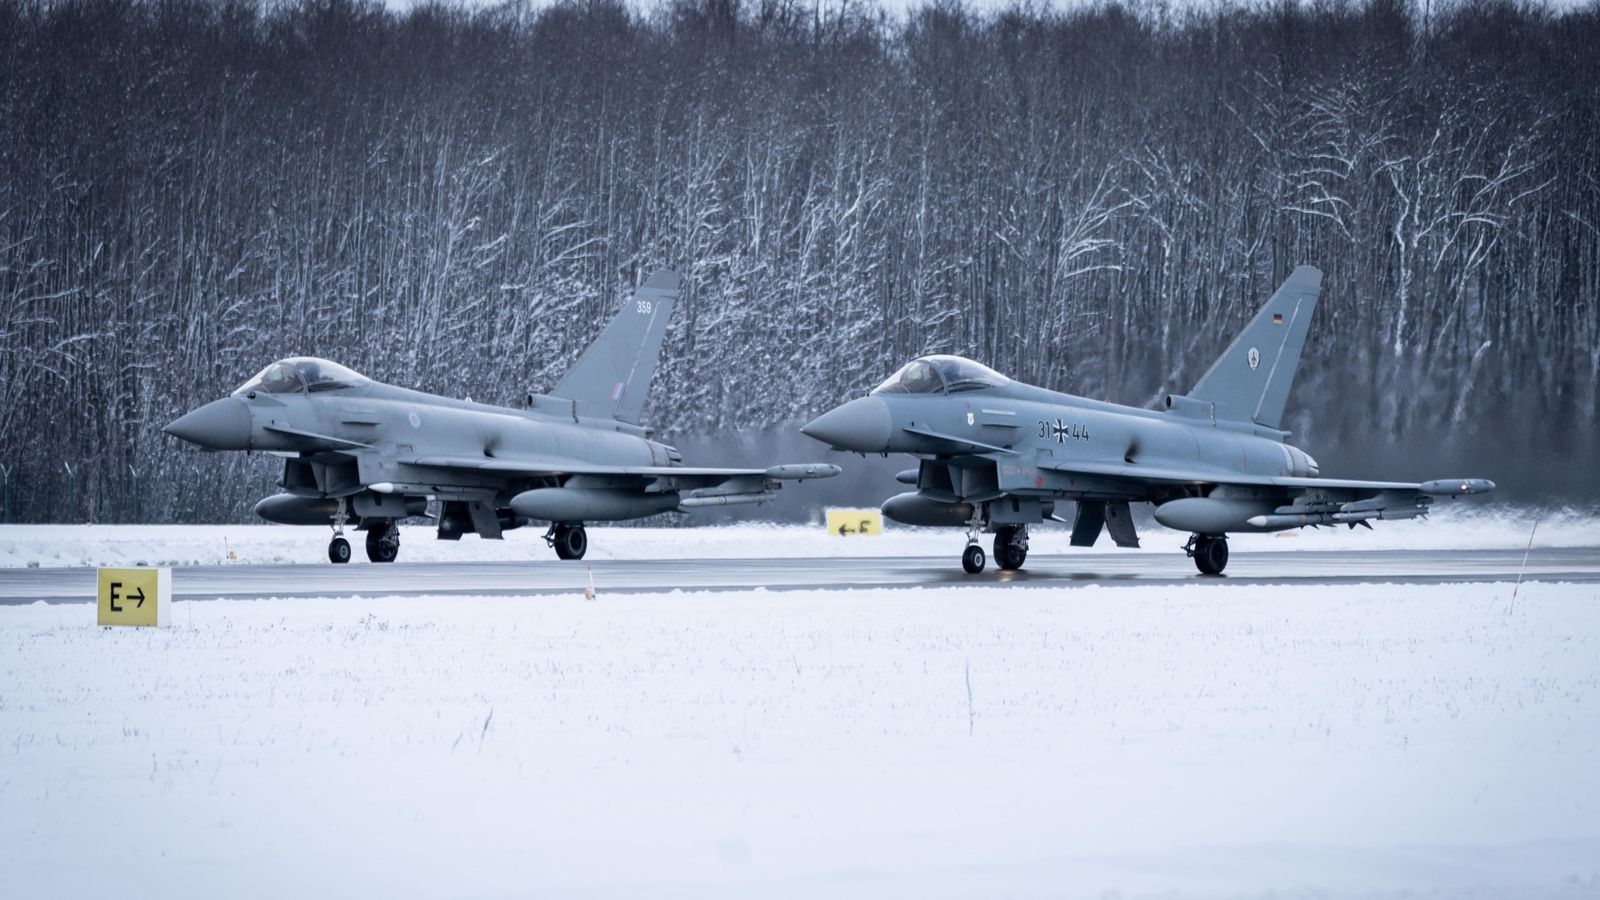 Russian aircraft intercepted by RAF and German air force in first of its kind NATO mission